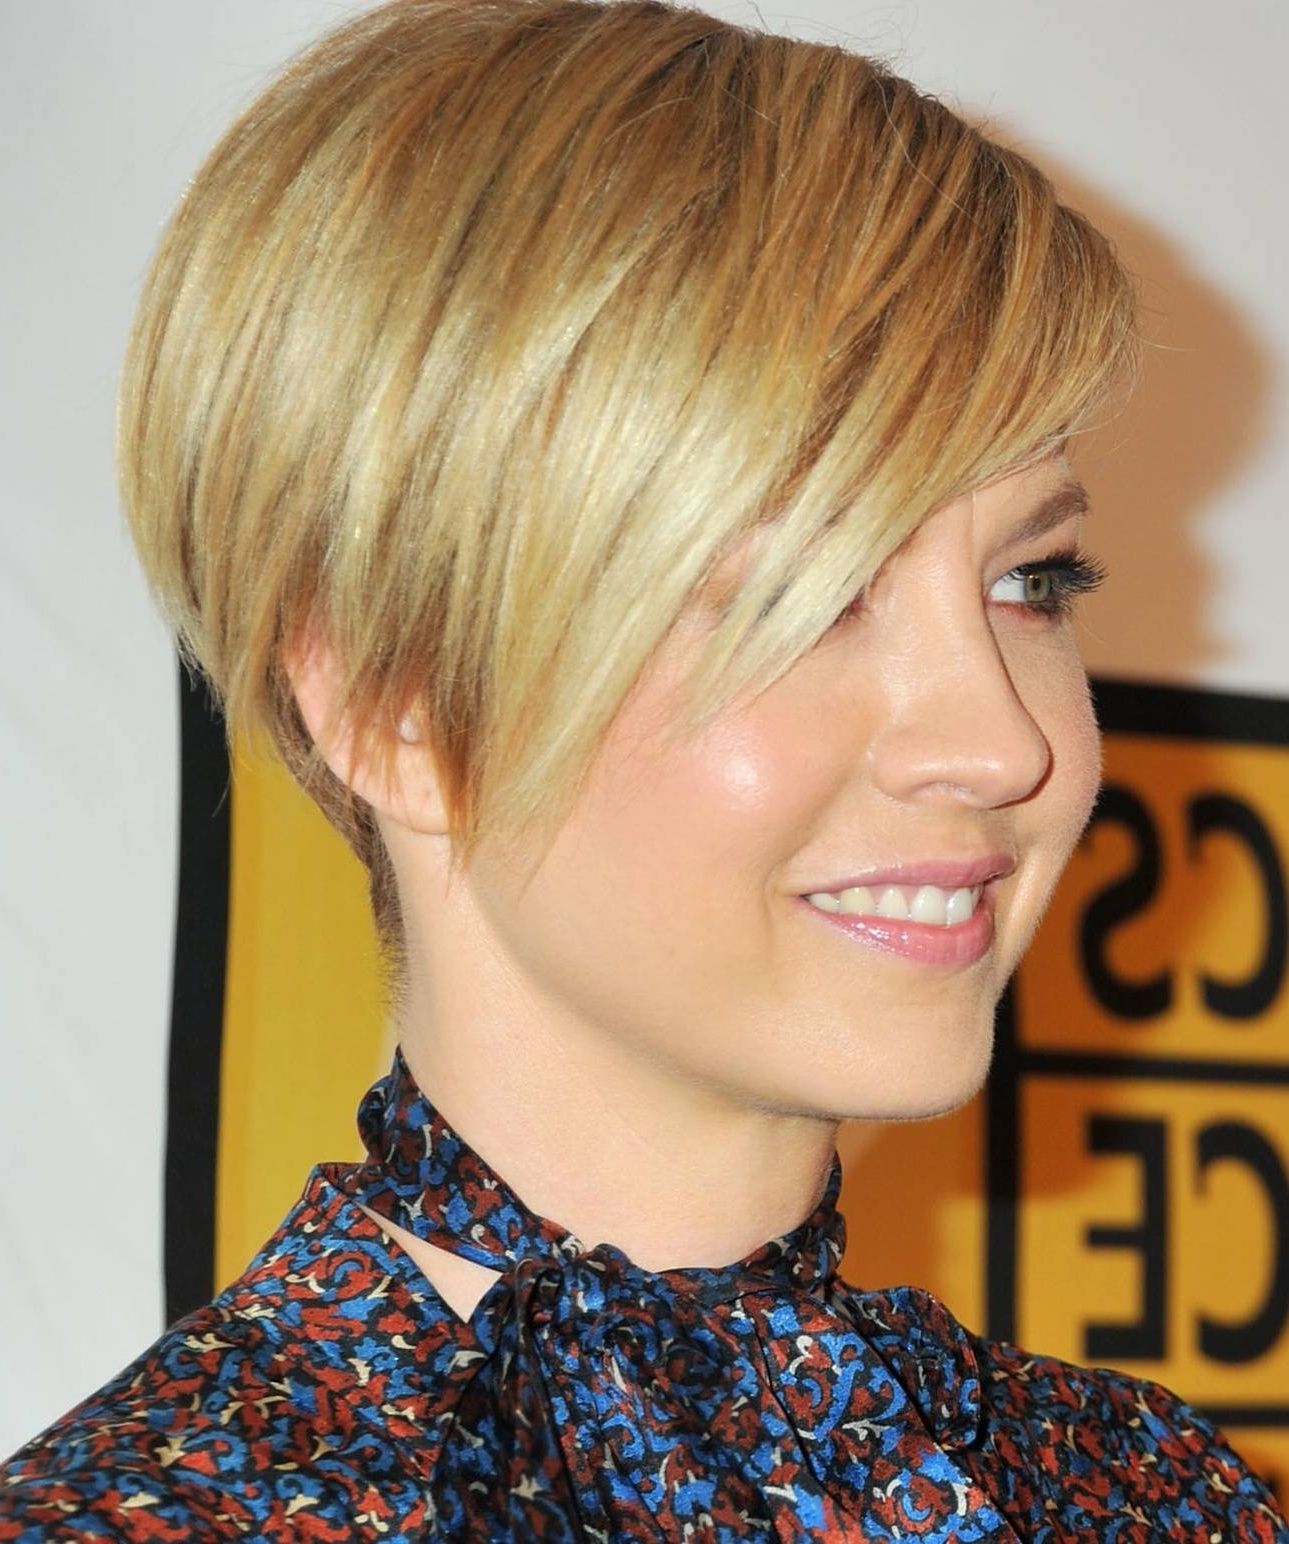 Widely Used Side Parted Silver Pixie Bob Hairstyles Regarding Inverted Bob Short Hairstyles – 28 Easy To Style Haircut Ideas (View 19 of 20)